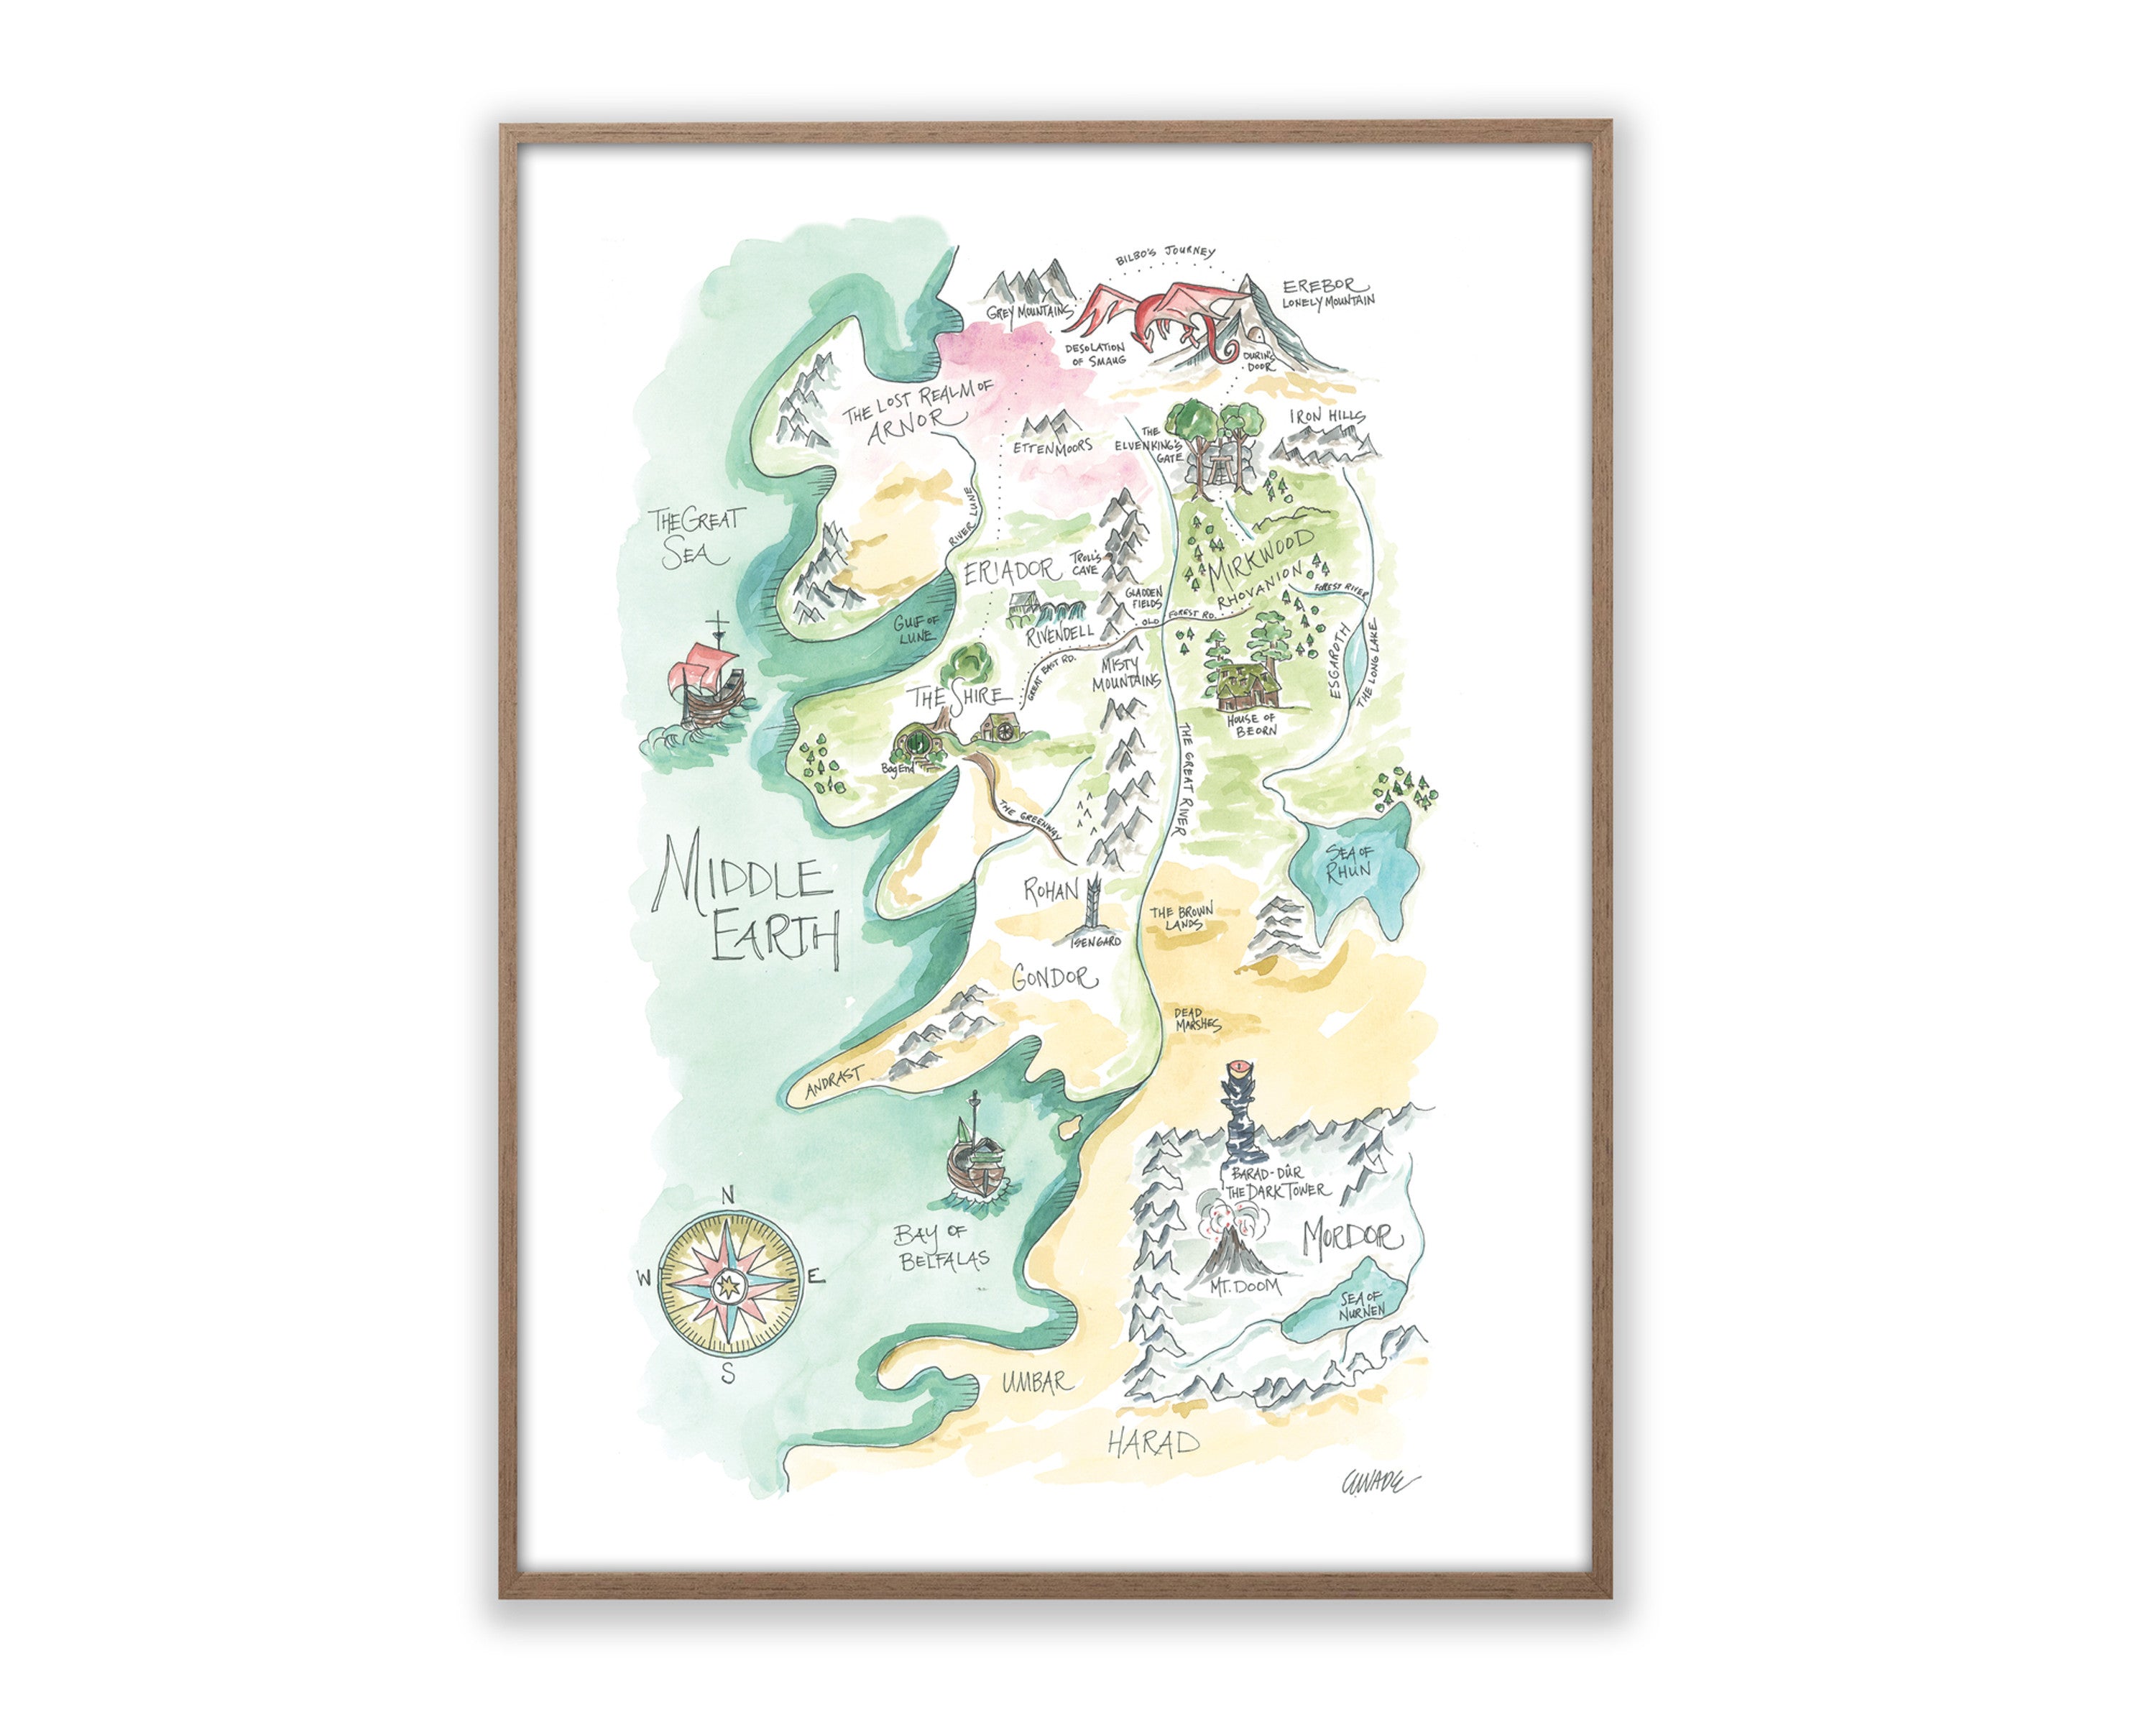 Lord of the Rings Middle Earth Map Hobbit Decor Art Print Photo